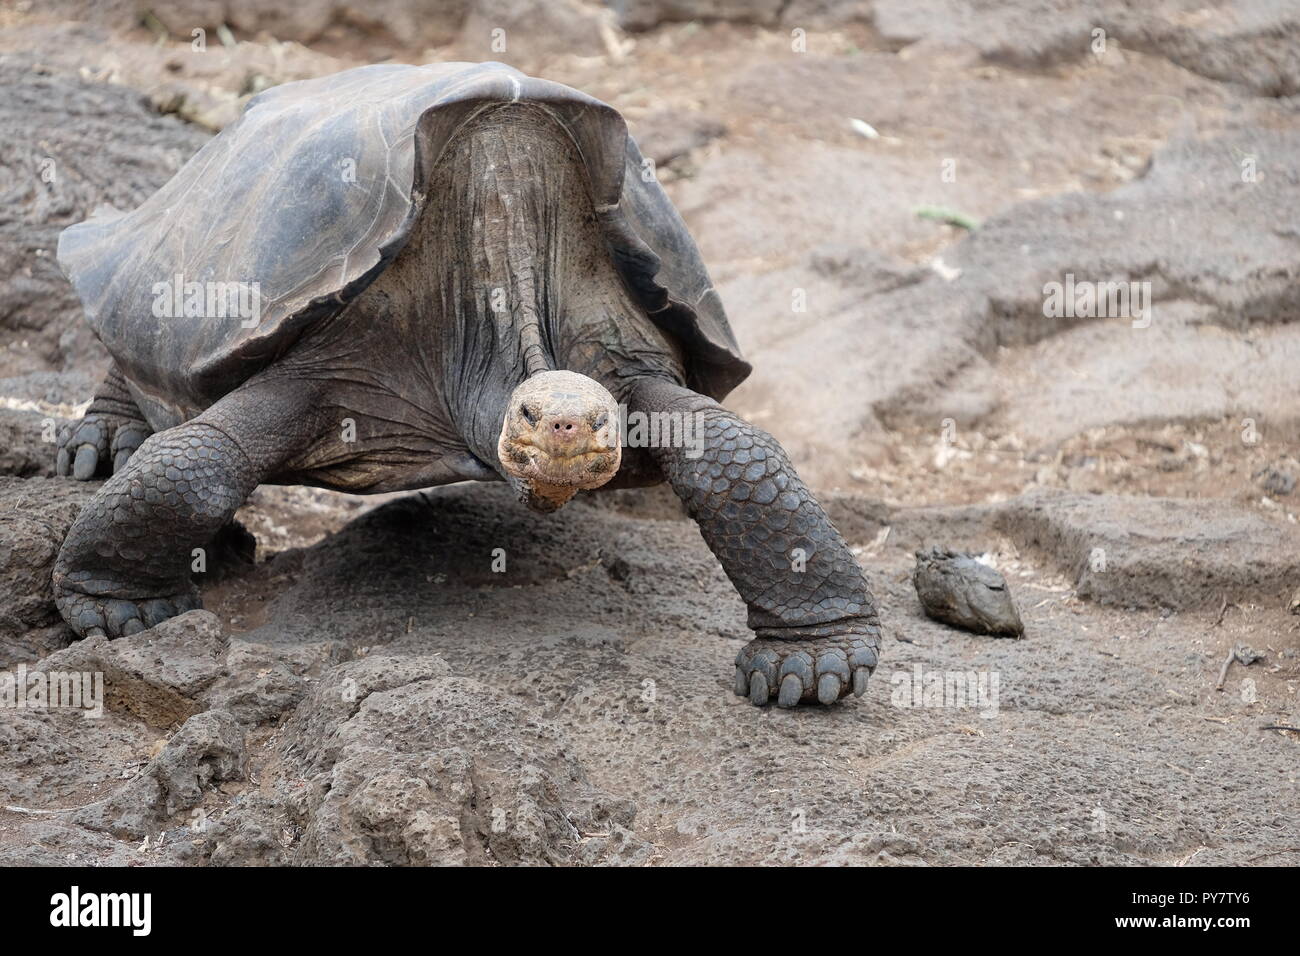 Giant long neck tortoise on rocky ground at the Charles Darwin Centre, Galapagos Islands Stock Photo